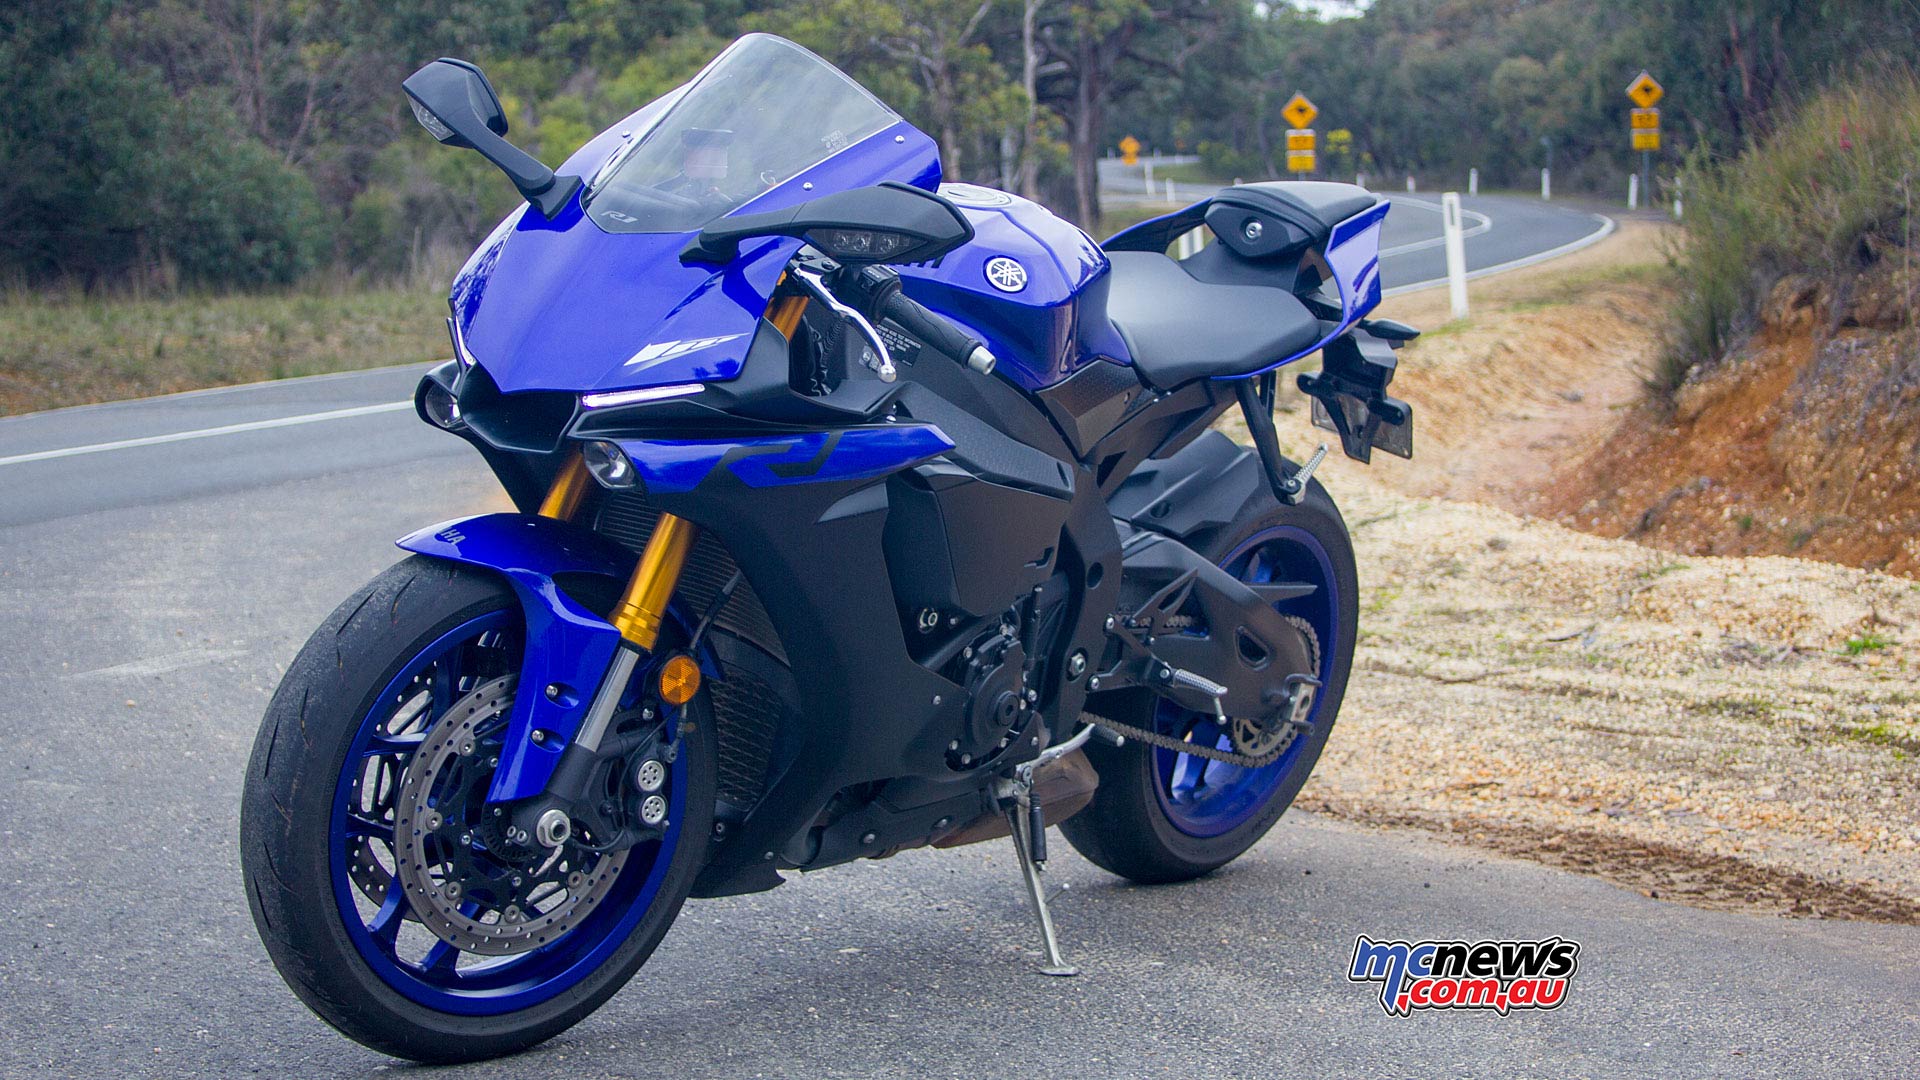 Yamaha YZF R1 Review. Motorcycle Test. Motorcycle News, Sport And Reviews